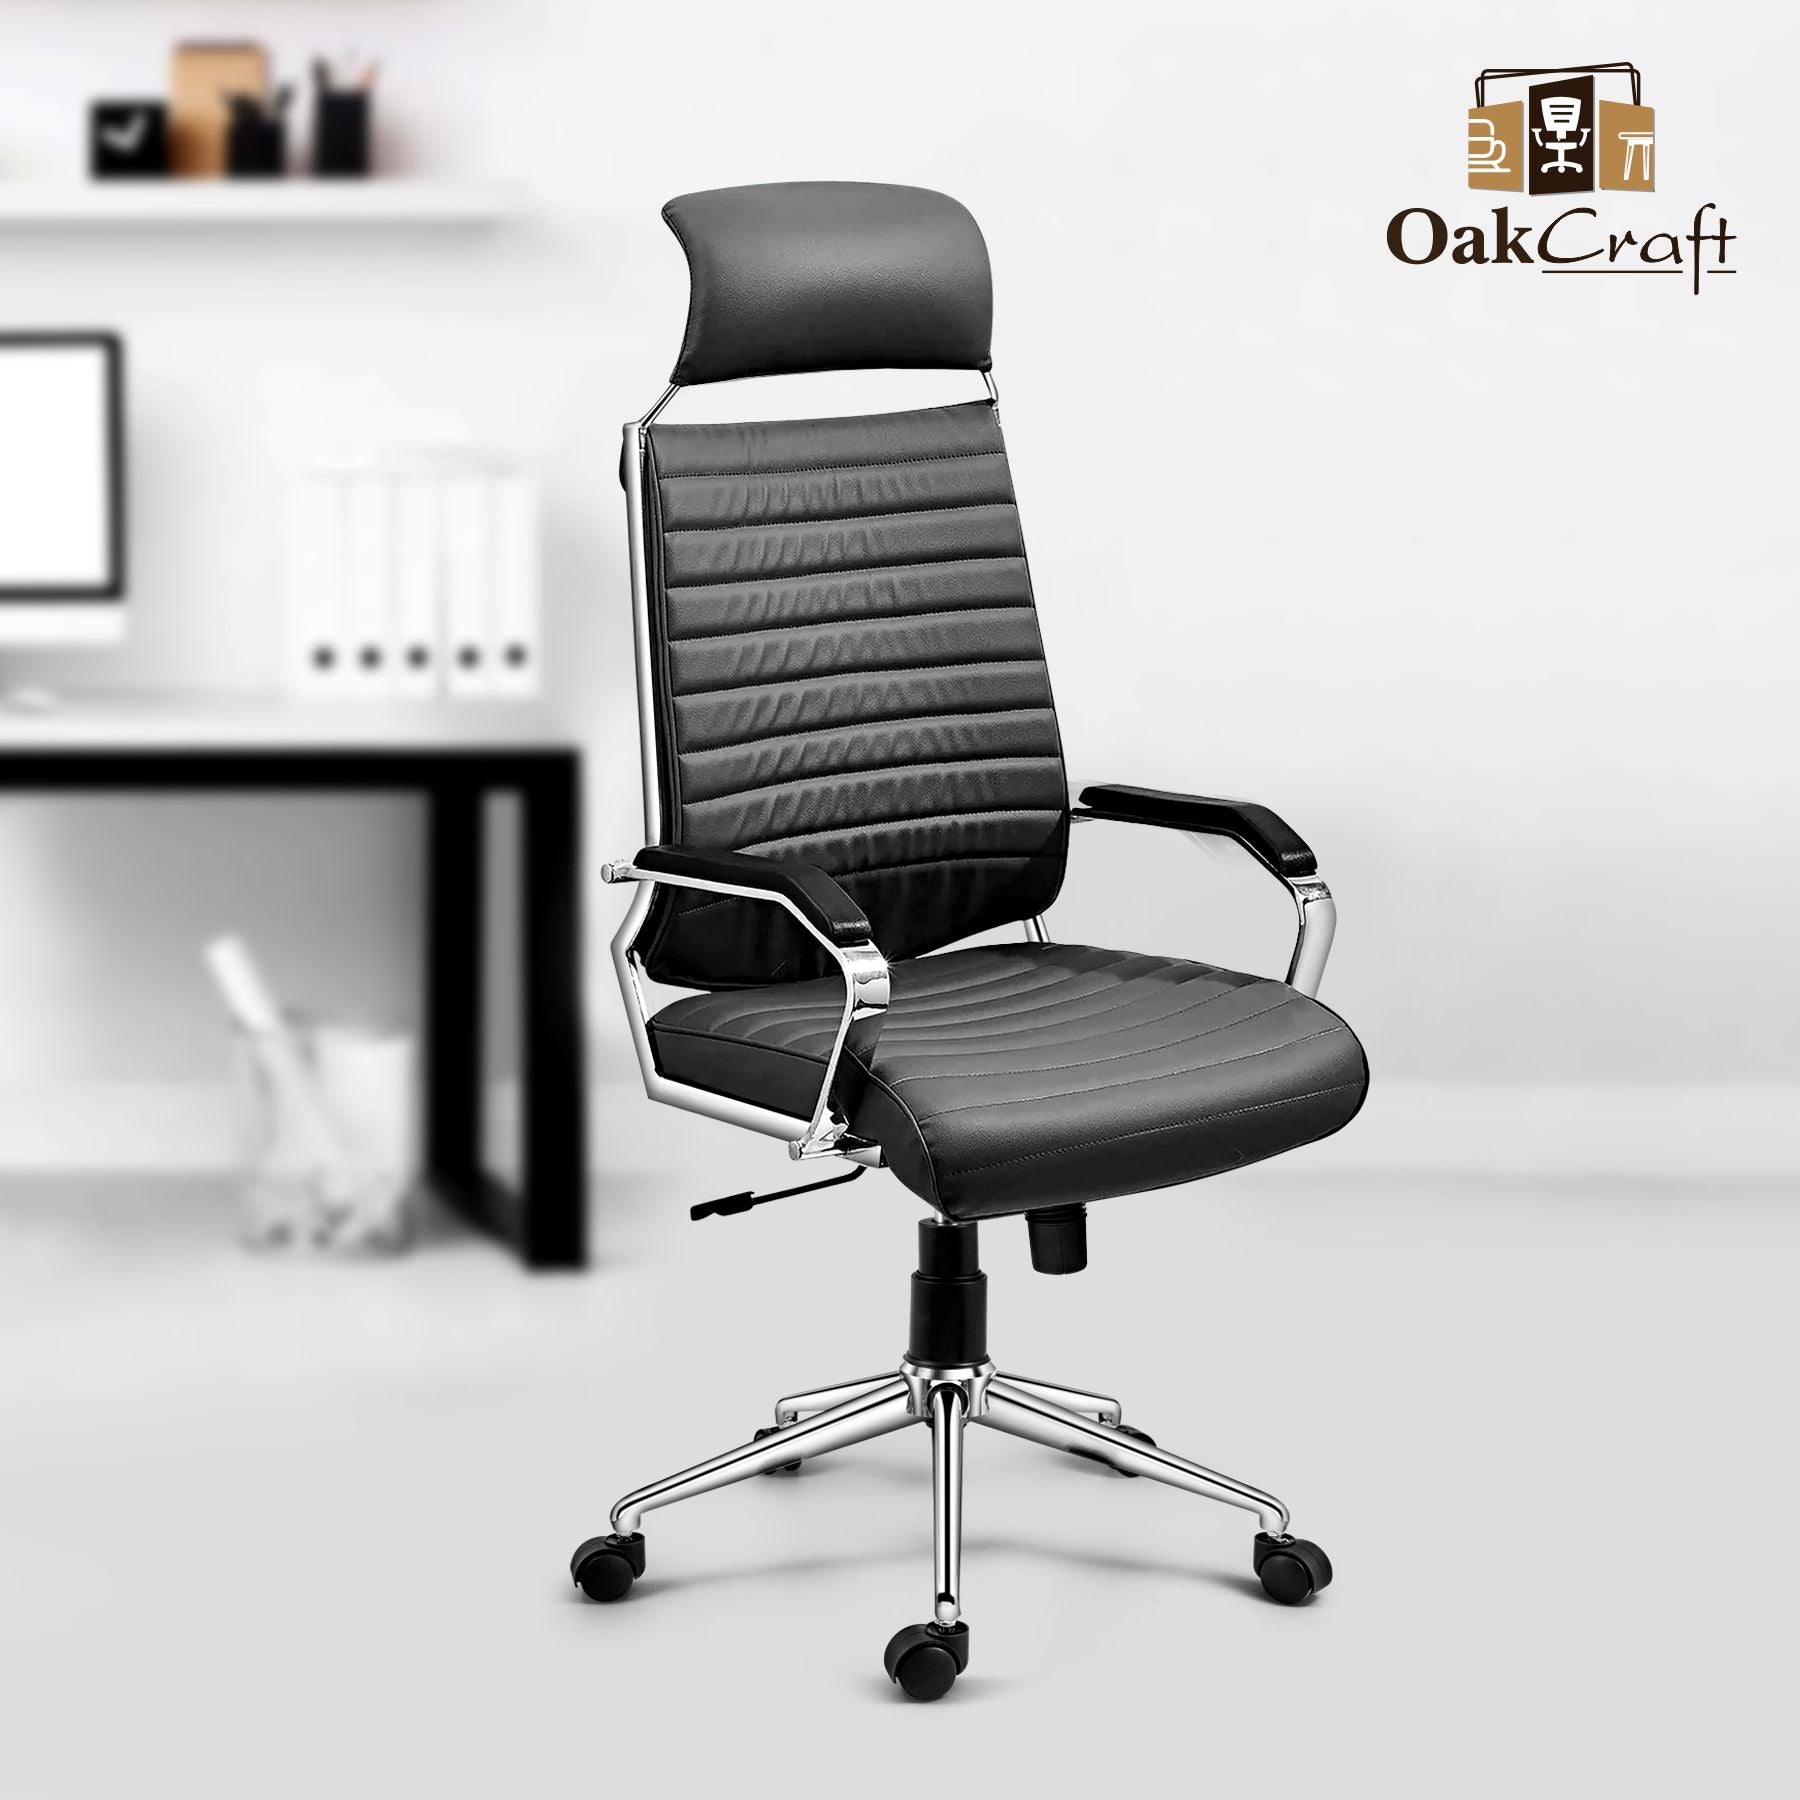 Oakcraft Acier- Made with French Artistry, Unrivaled Ergonomics in the Prime Metal Sleek Leatherette Office Executive Chair - Oakcraft